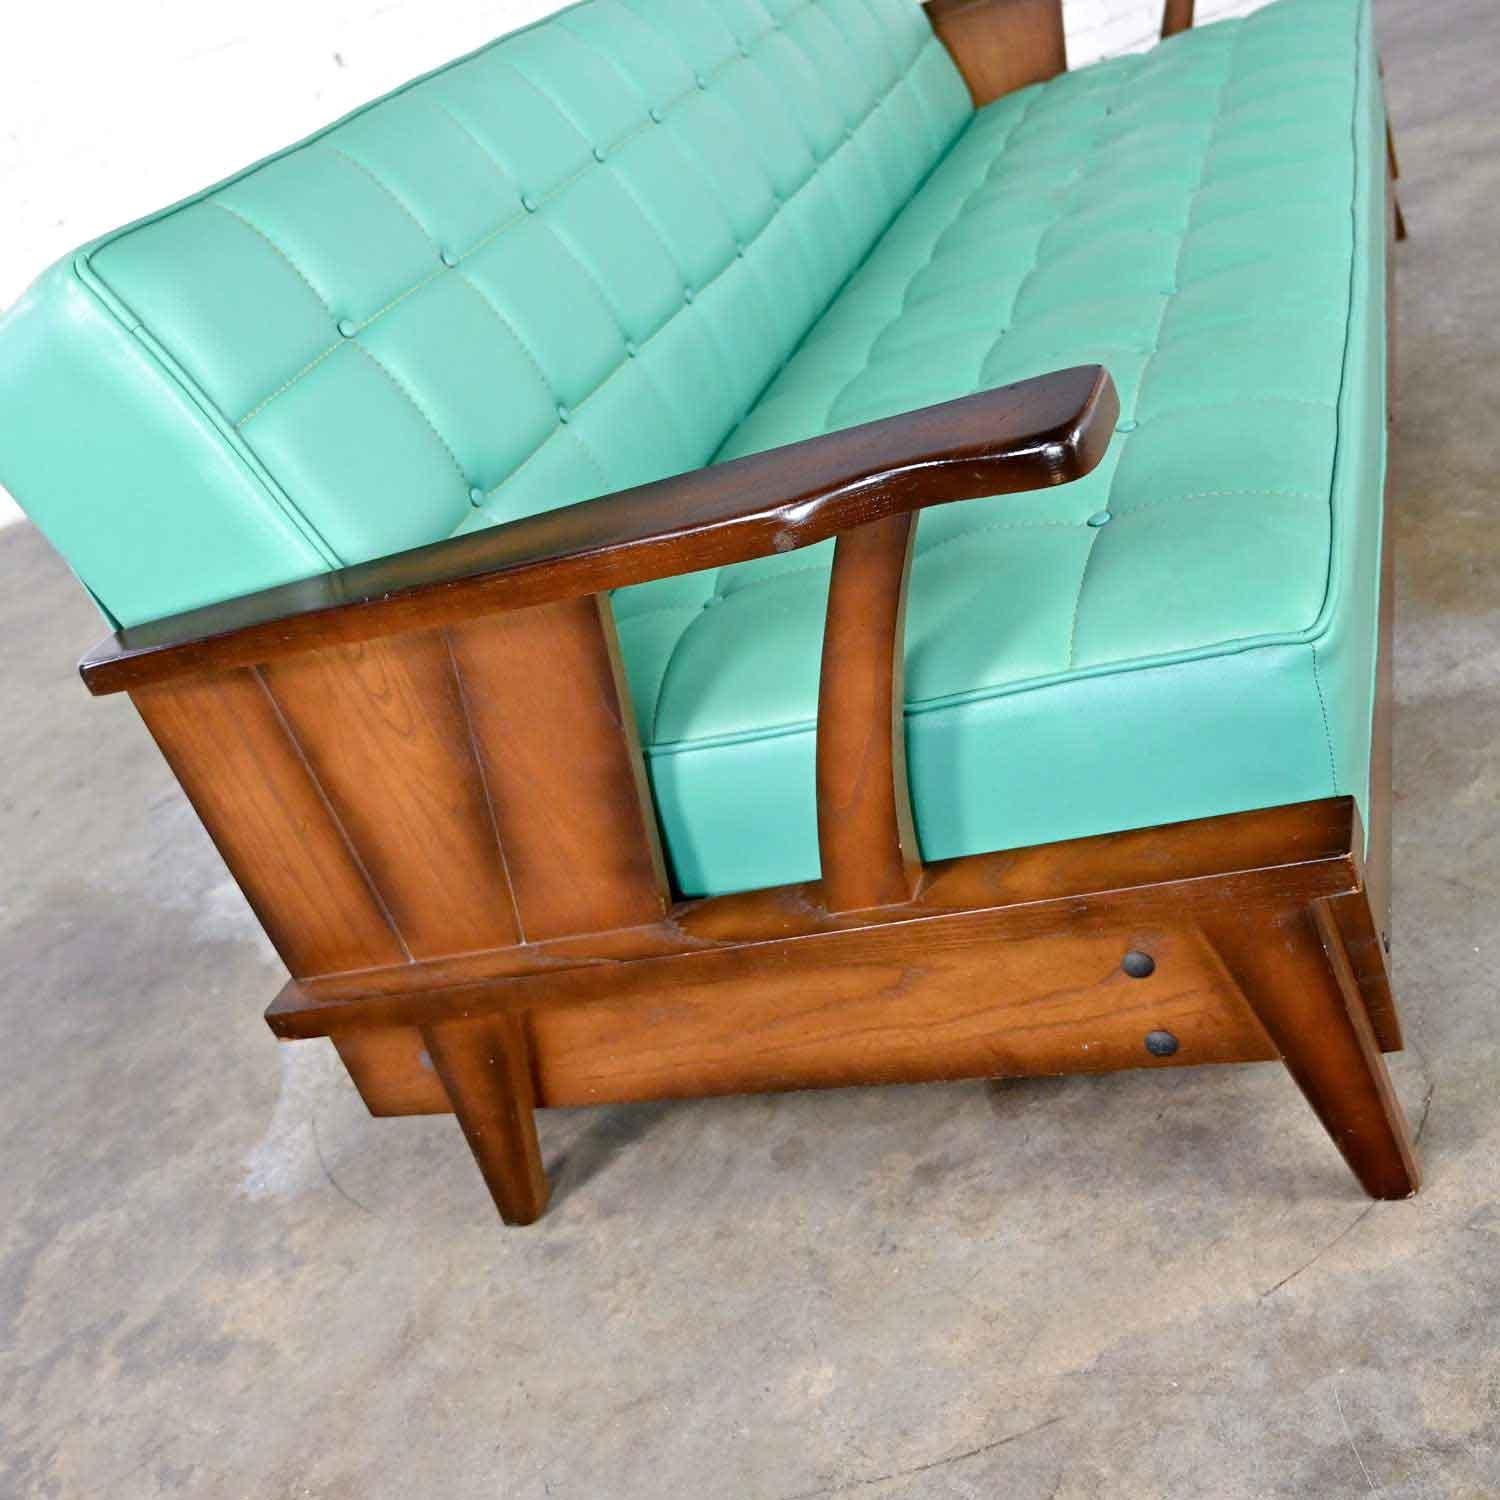 Brandt Ranch Oak Style Turquoise Vinyl Convertible Sofa Daybed by Economy Furn 2